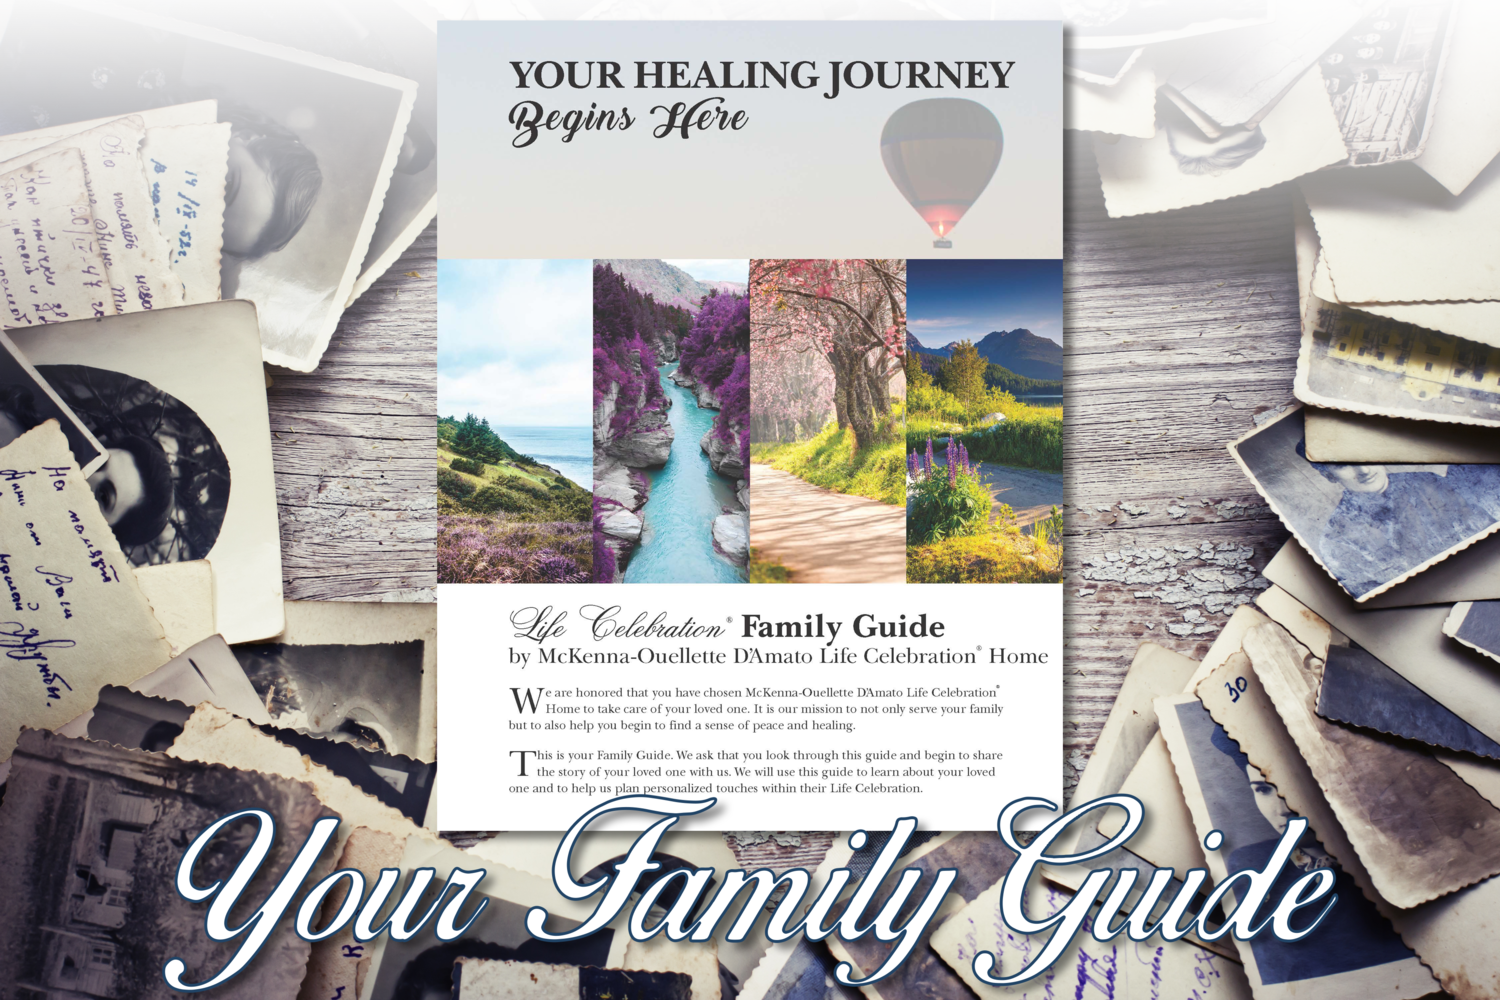 McKenna-Ouellette Family Guide